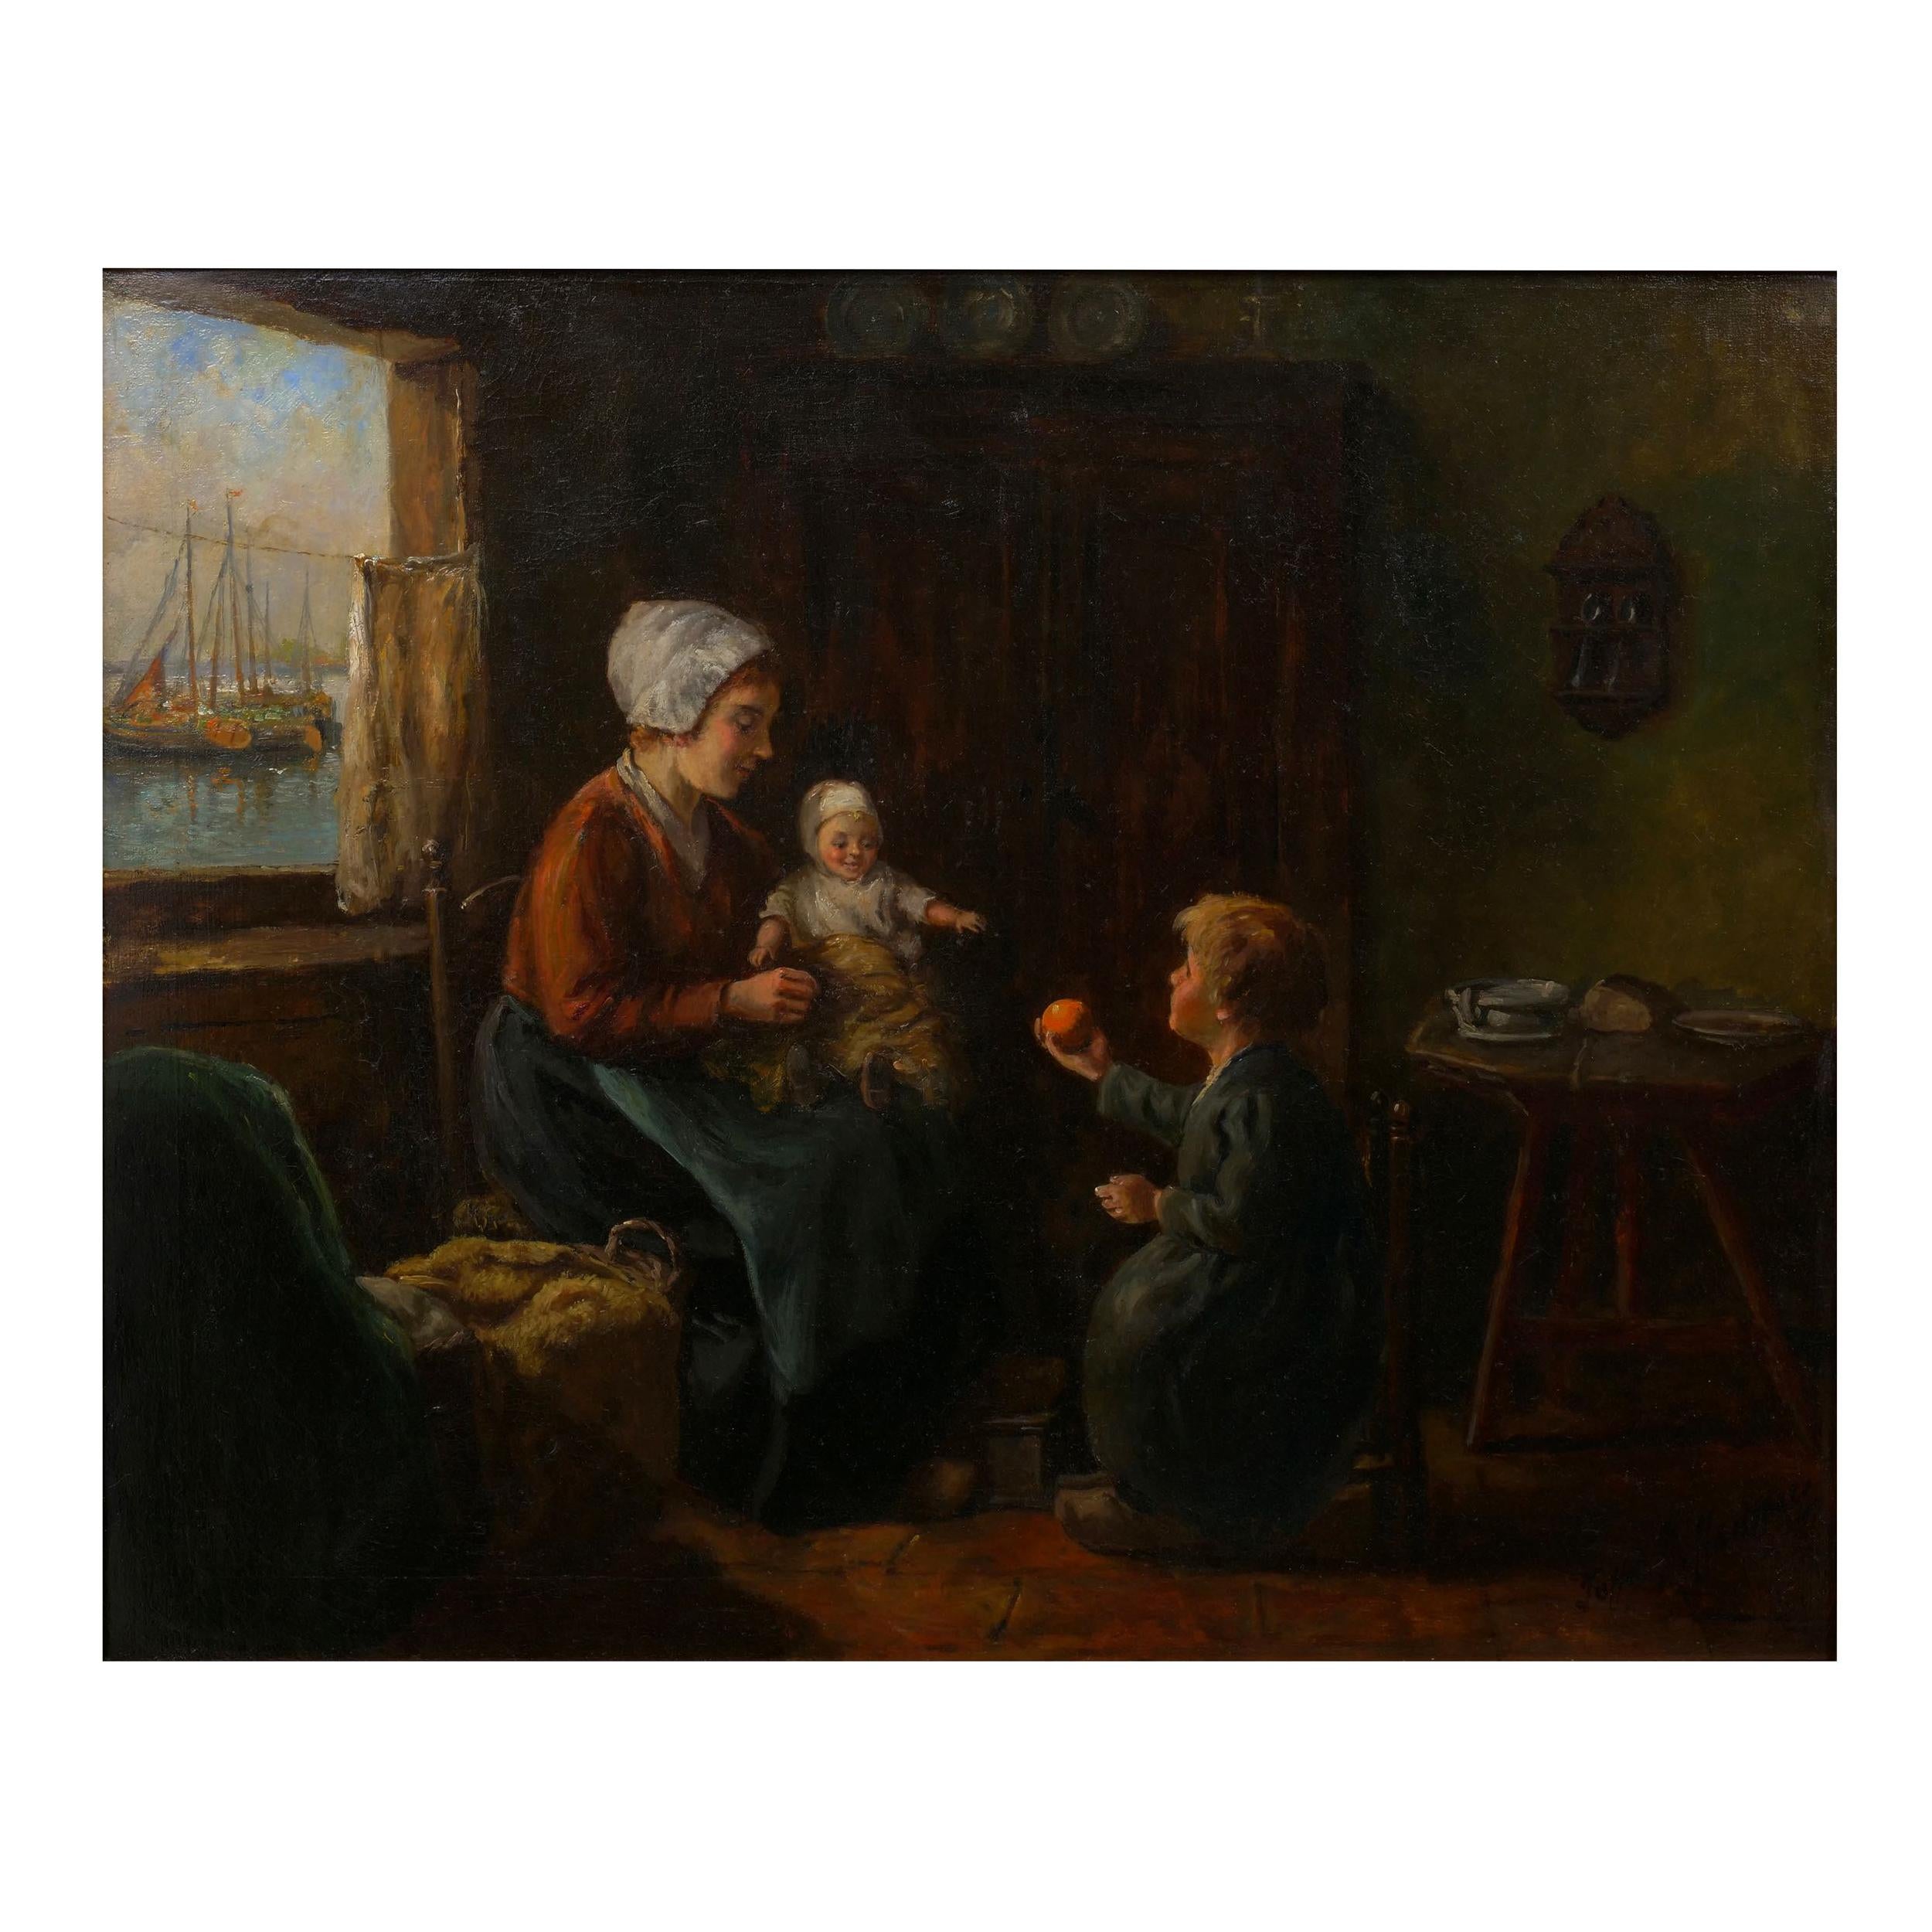 A fine interior scene of a family's home depicting a mother with her small children interacting by an open window that overlooks the harbor with rows of sailboats along the dock. The interior is exquisitely detailed in the Dutch taste, distinctly